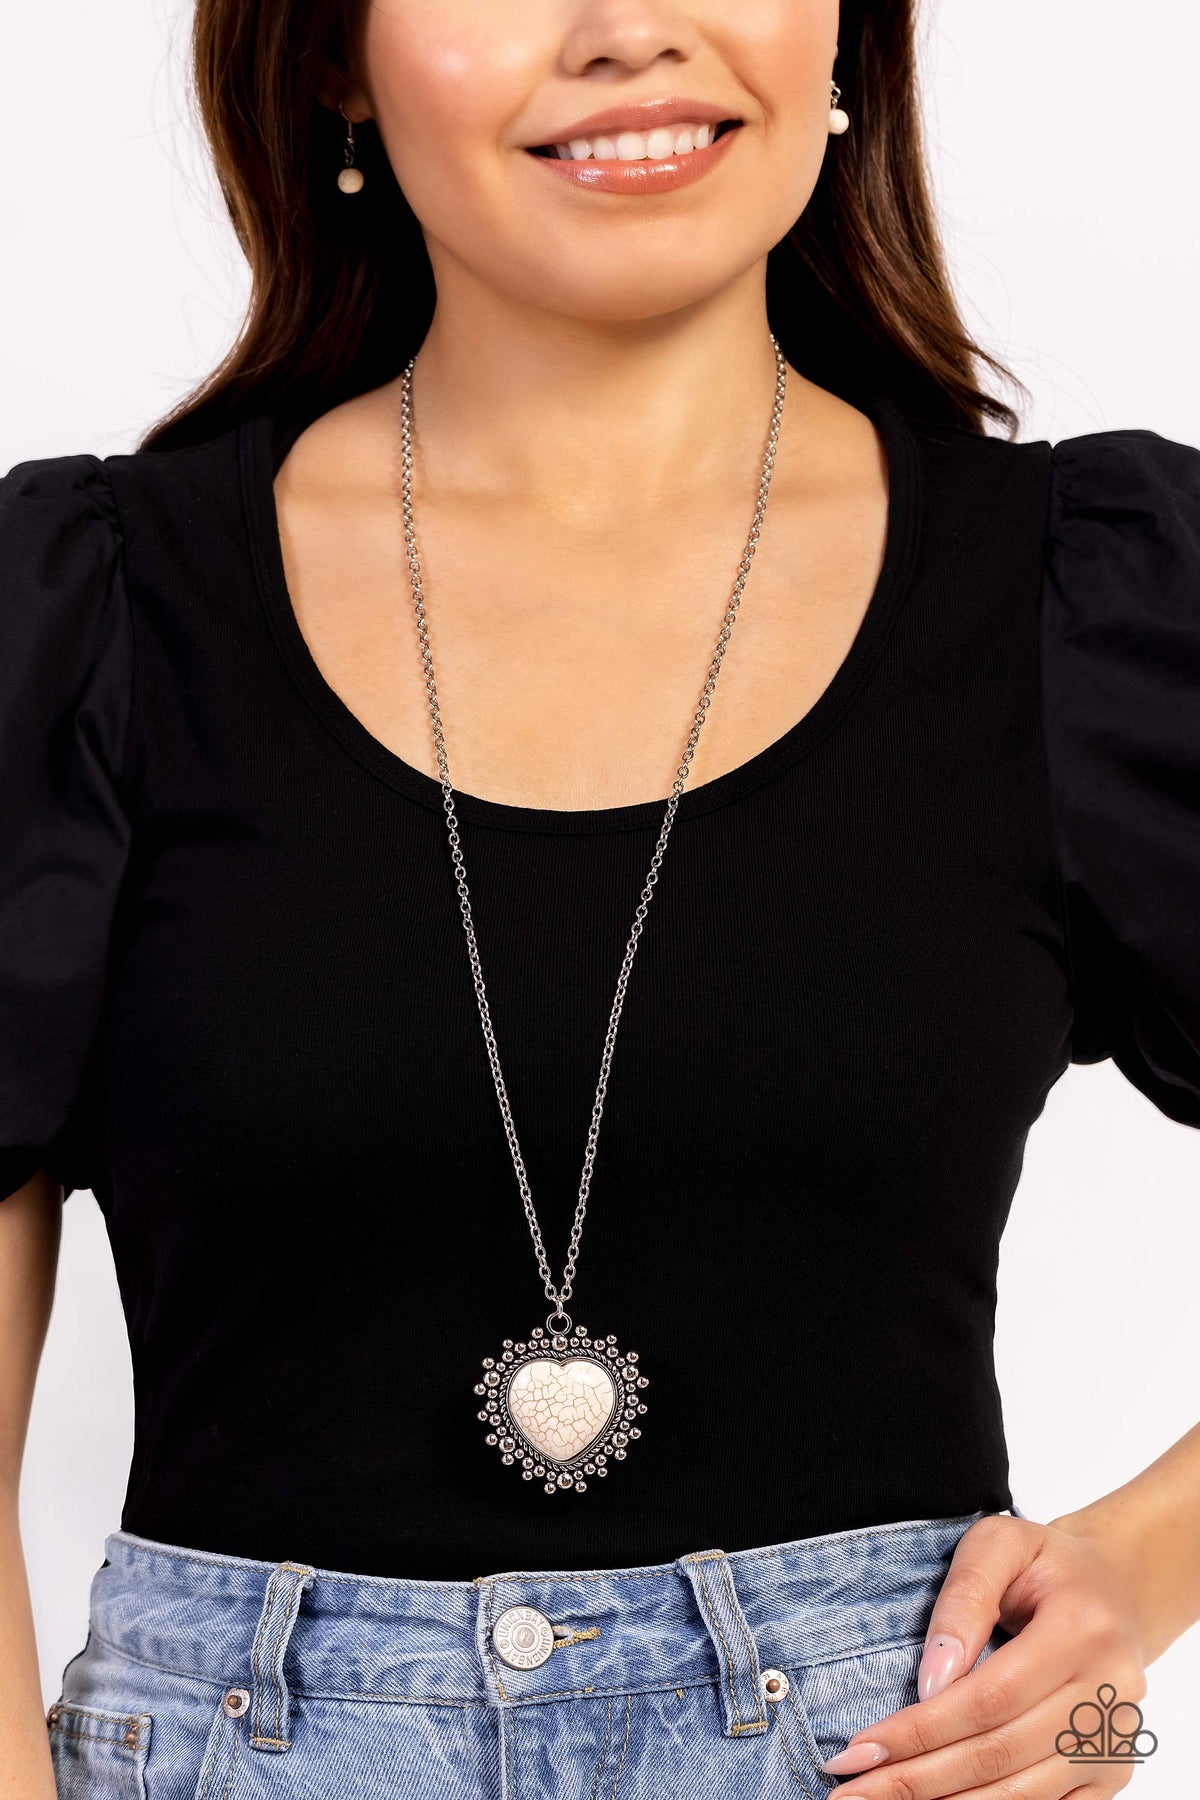 Southwestern Sentiment White Stone Heart Necklace - Paparazzi Accessories-on model - CarasShop.com - $5 Jewelry by Cara Jewels